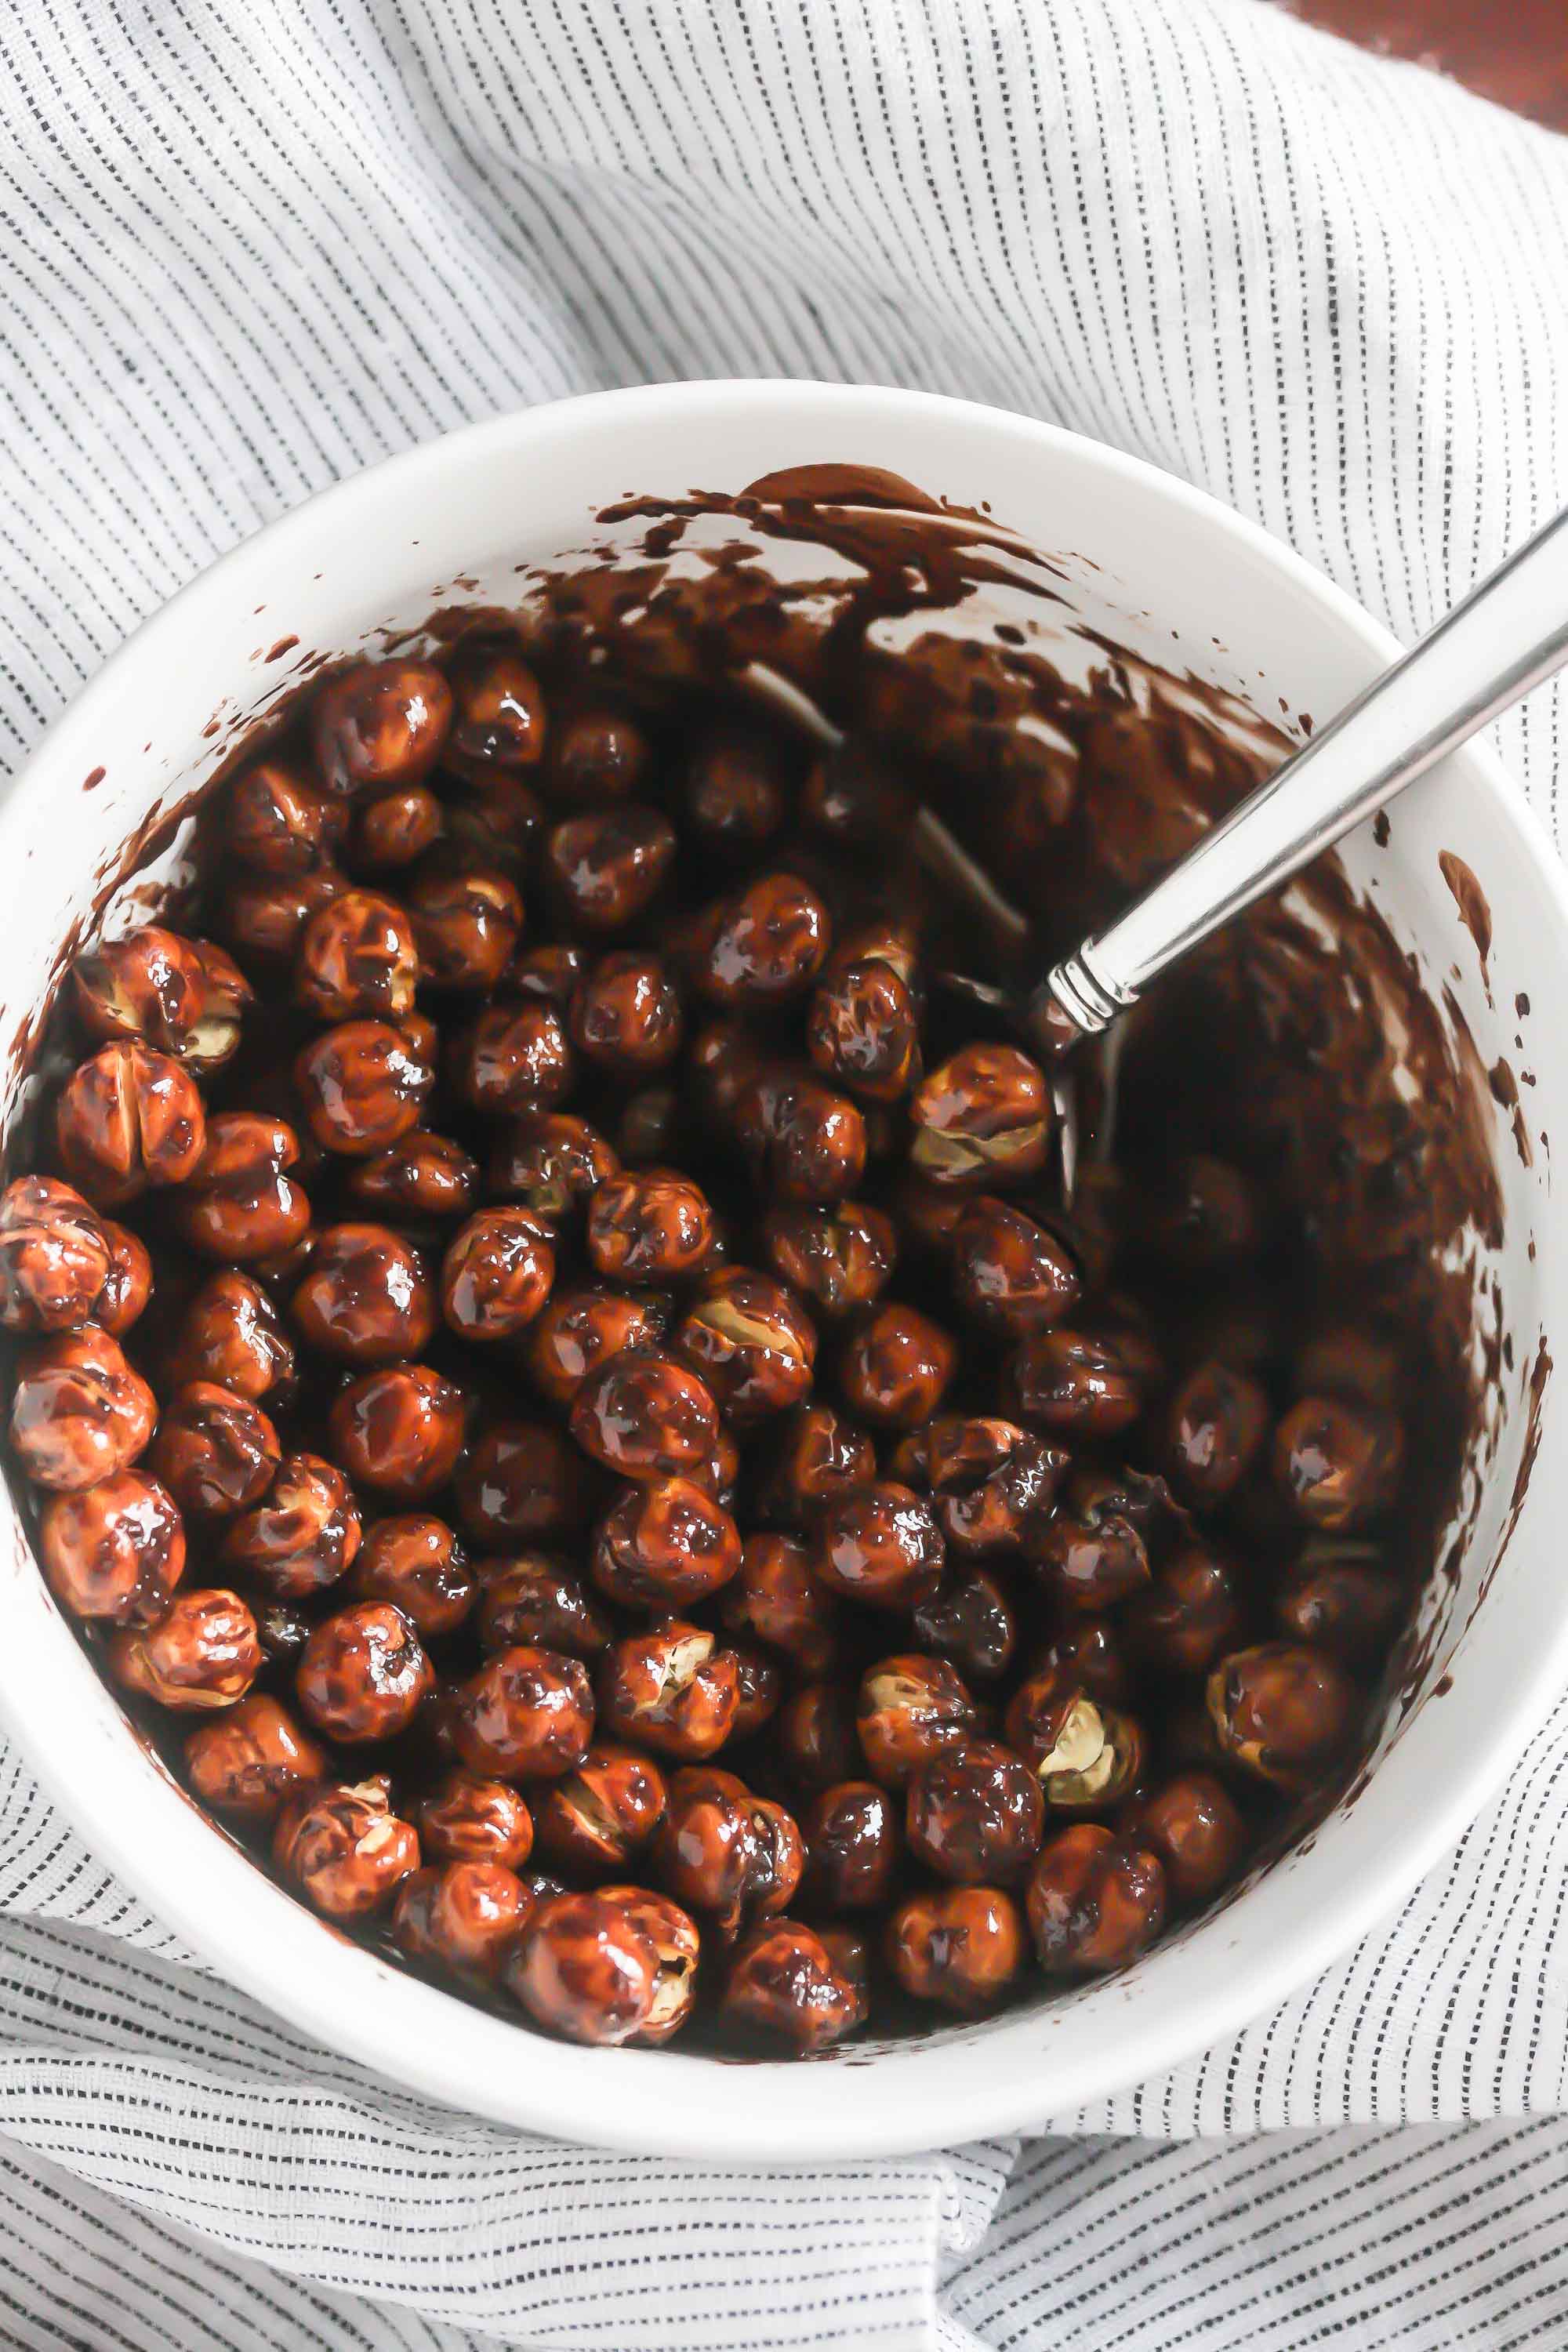 These Chocolate Covered Roasted Chickpeas are packed with protein and are crazy delicious! #vegan #glutenfree